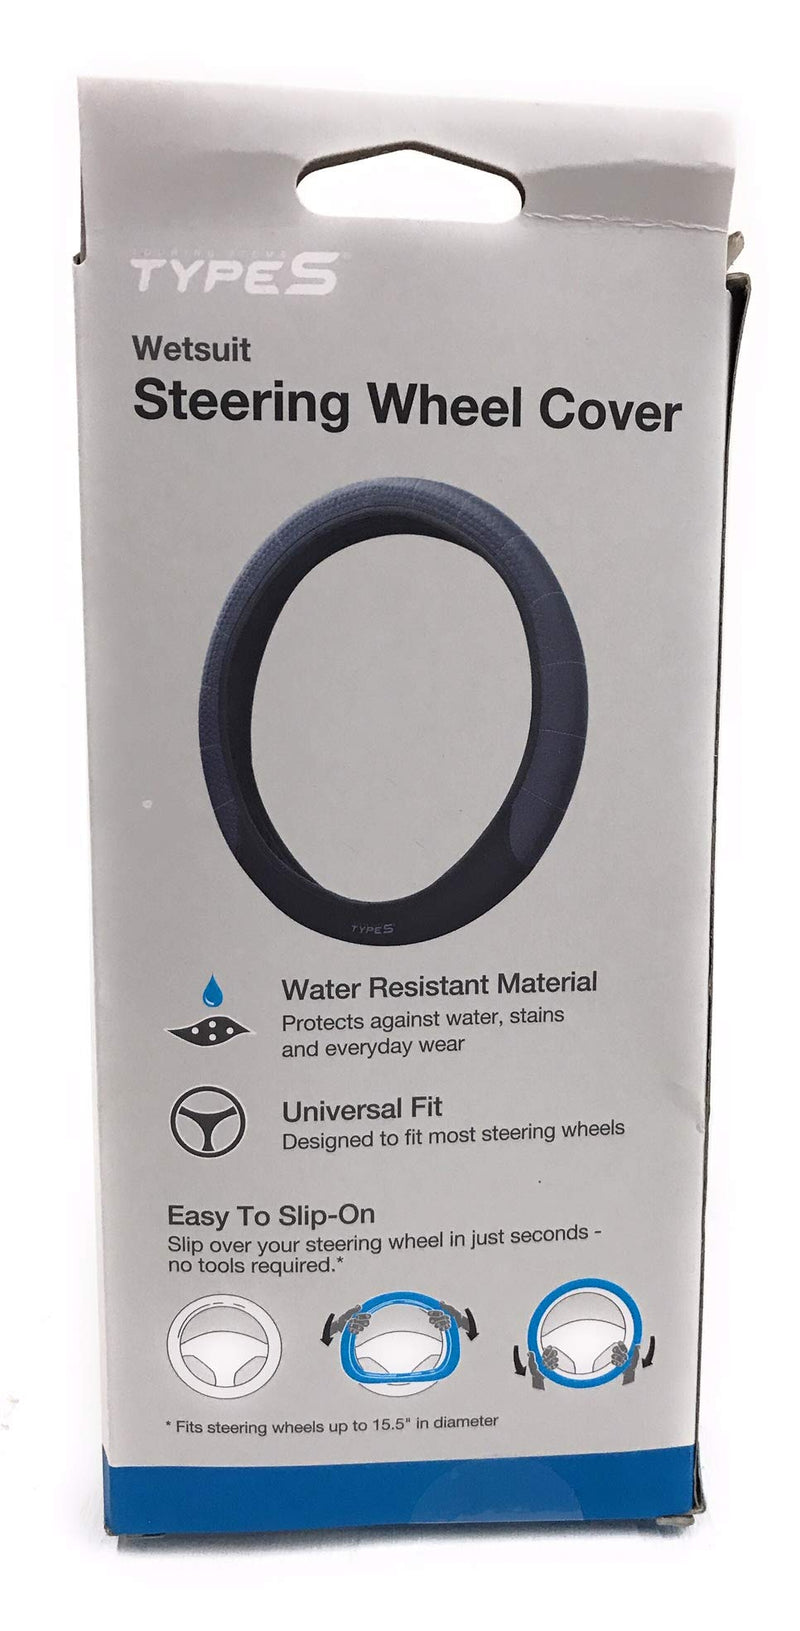  [AUSTRALIA] - Types Wetsuit Steering Wheel Cover by Winplus, Universal Fit